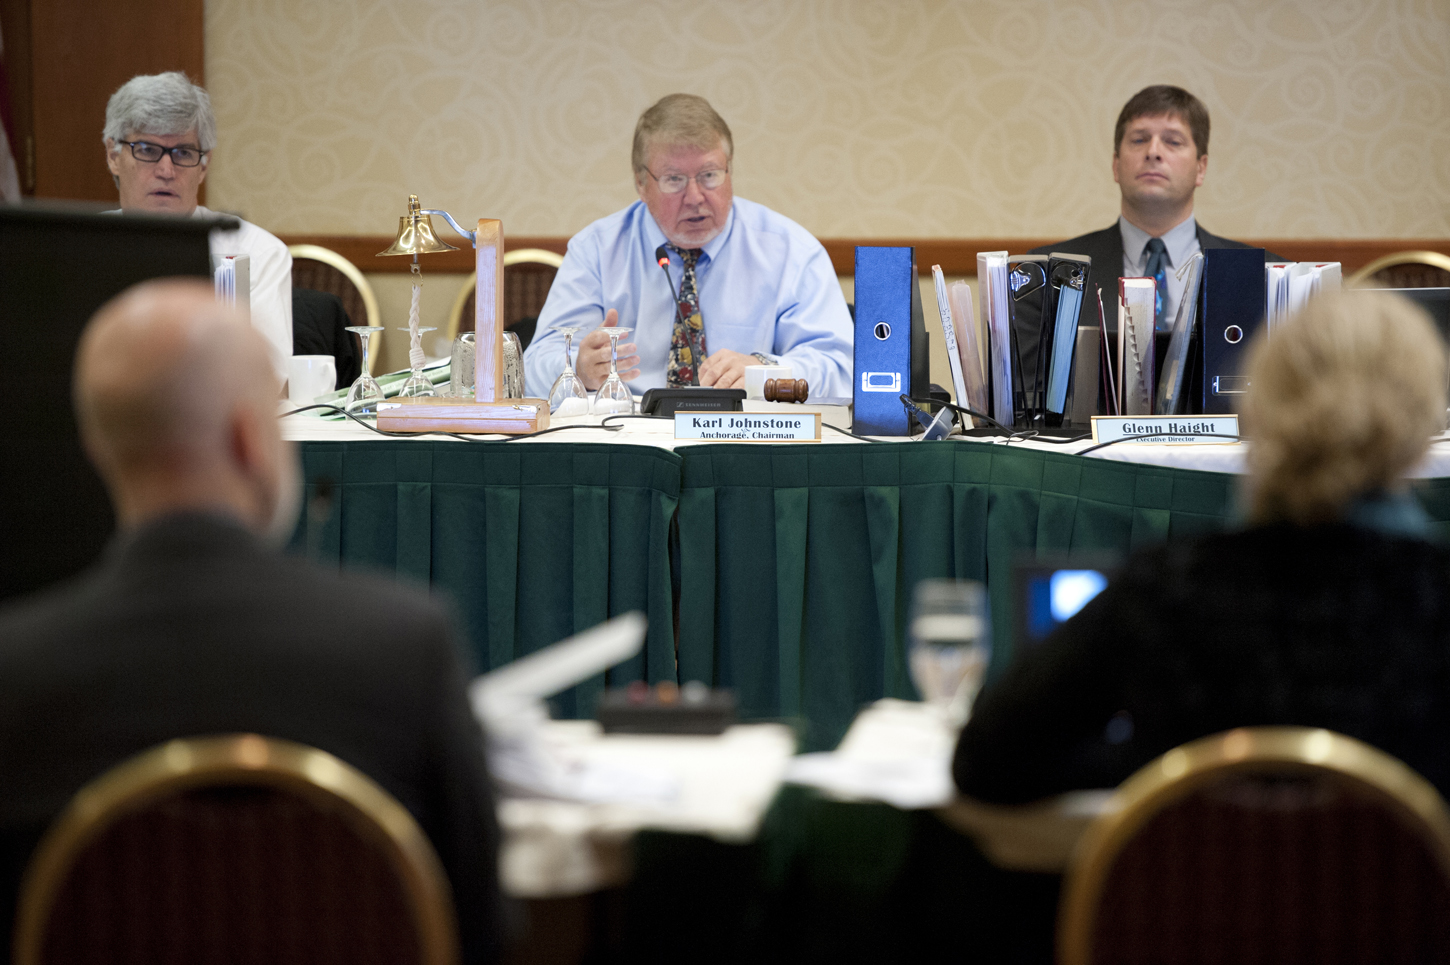 The Alaska Board of Fisheries has an open regulatory process, with all members of the public allowed to submit proposals for management to be considered by the seven-member board. Each state waters fishery is considered once every three years, with occasional issues taken up sooner if the board chooses. Here, Chairman Karl Johnstone presides over the Pacific cod meeting held this past October in Anchorage. The longest meeting is for Upper Cook Inlet, which takes two weeks and will begin in late January 2014. -Photo by Michael Dinneen, Morris News Service - Alaska